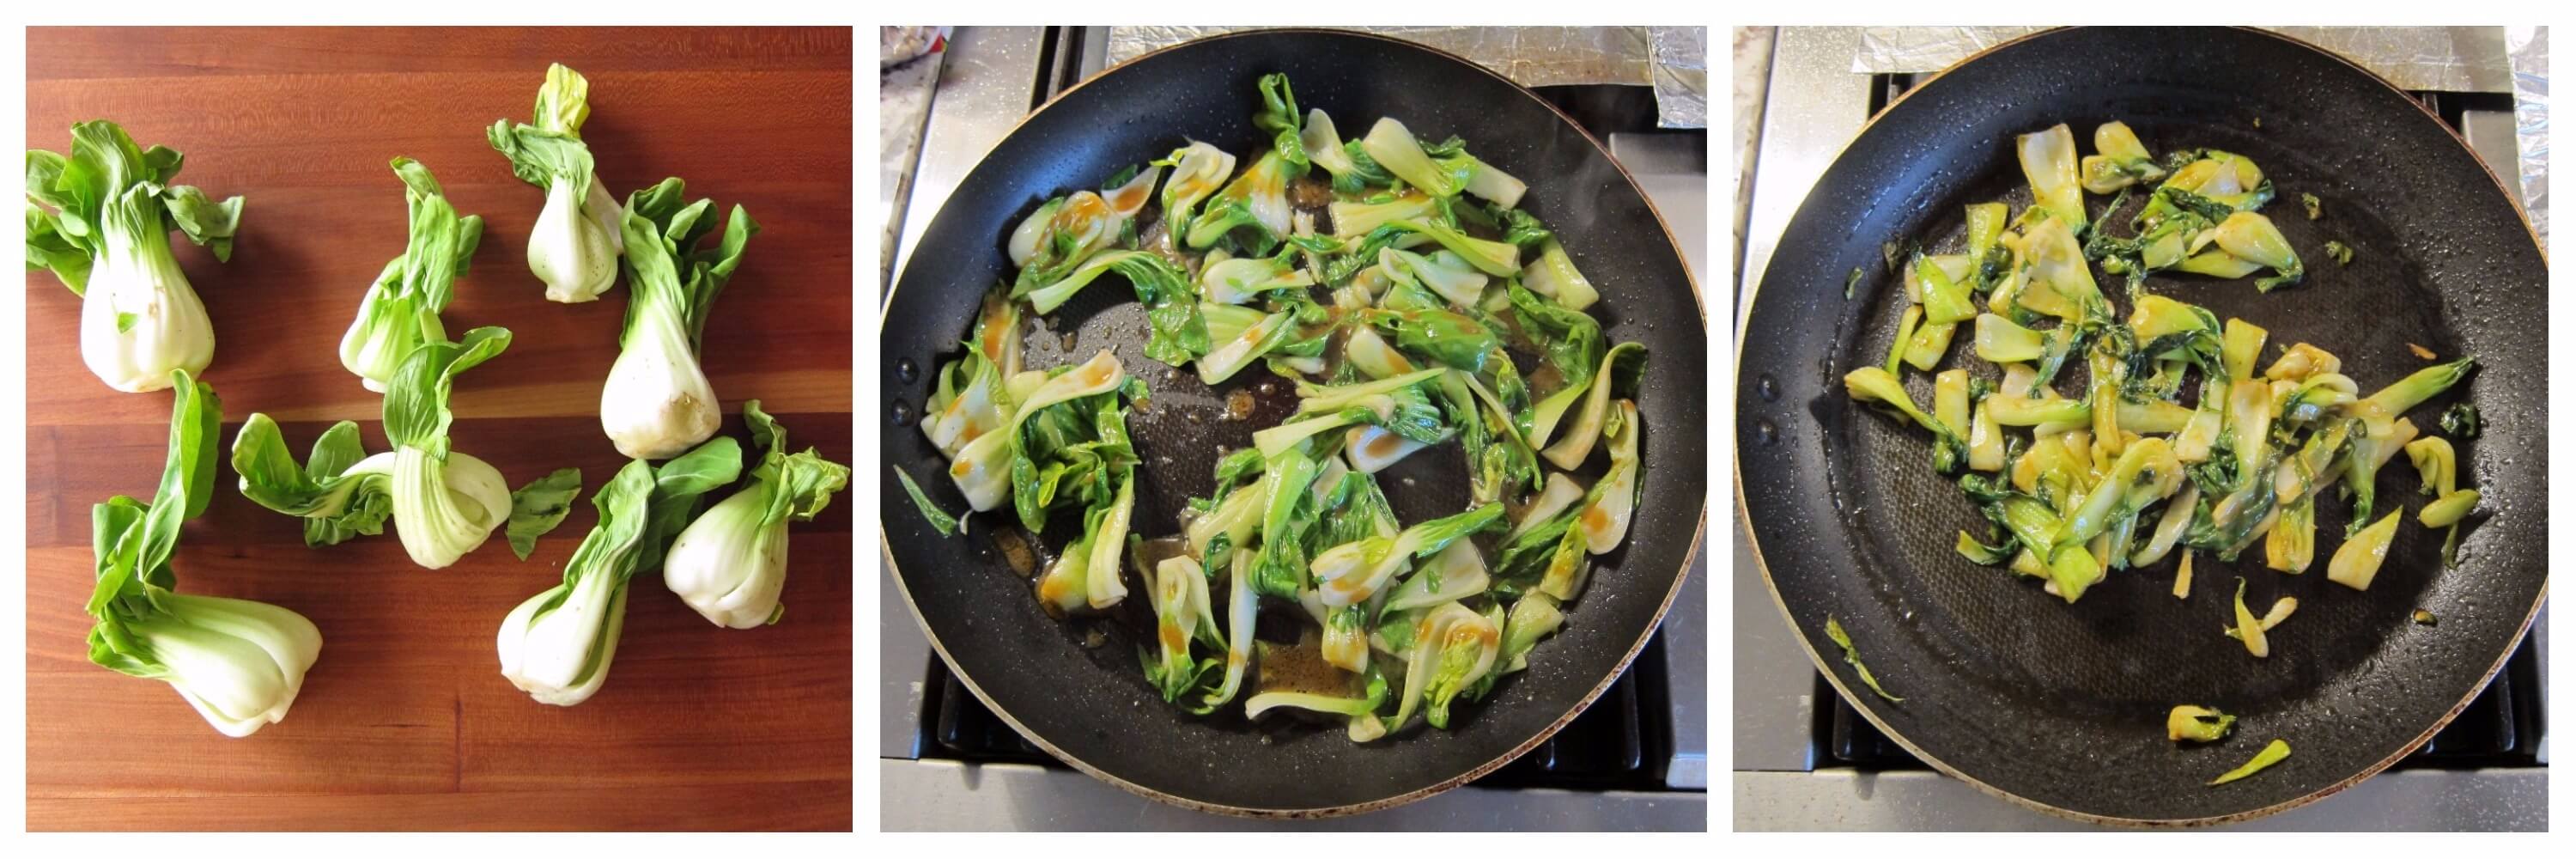 Baby bok choy sauteed in a frying pan